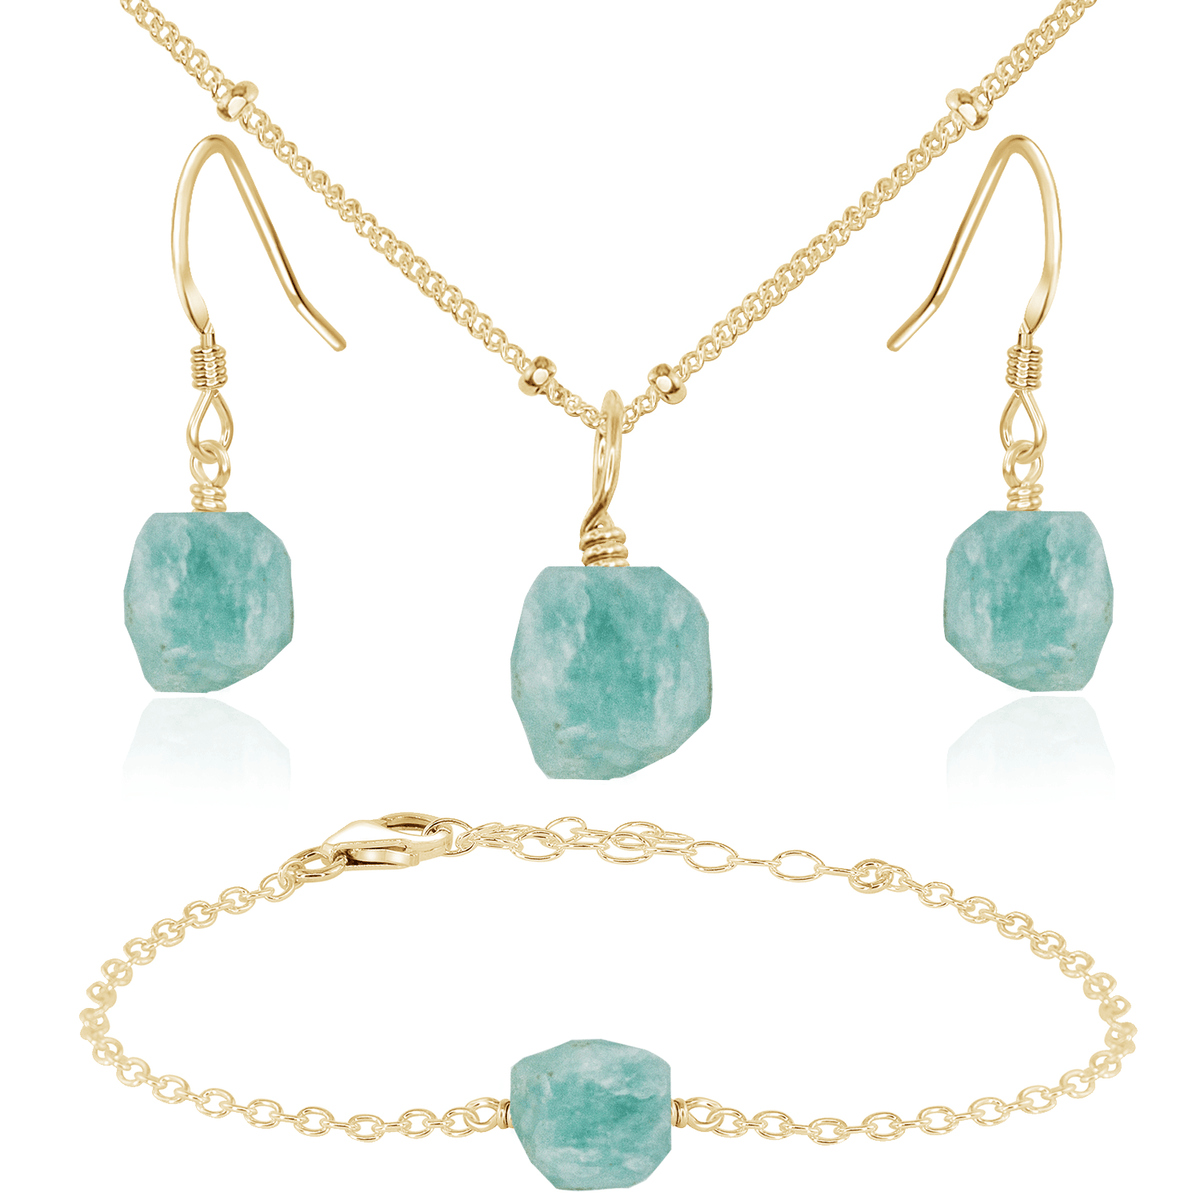 Raw Amazonite Crystal Necklace, Earrings and Bracelet Set - Raw Amazonite Crystal Necklace, Earrings and Bracelet Set - 14k Gold Fill / Satellite / Necklace & Earrings & Bracelet - Luna Tide Handmade Crystal Jewellery